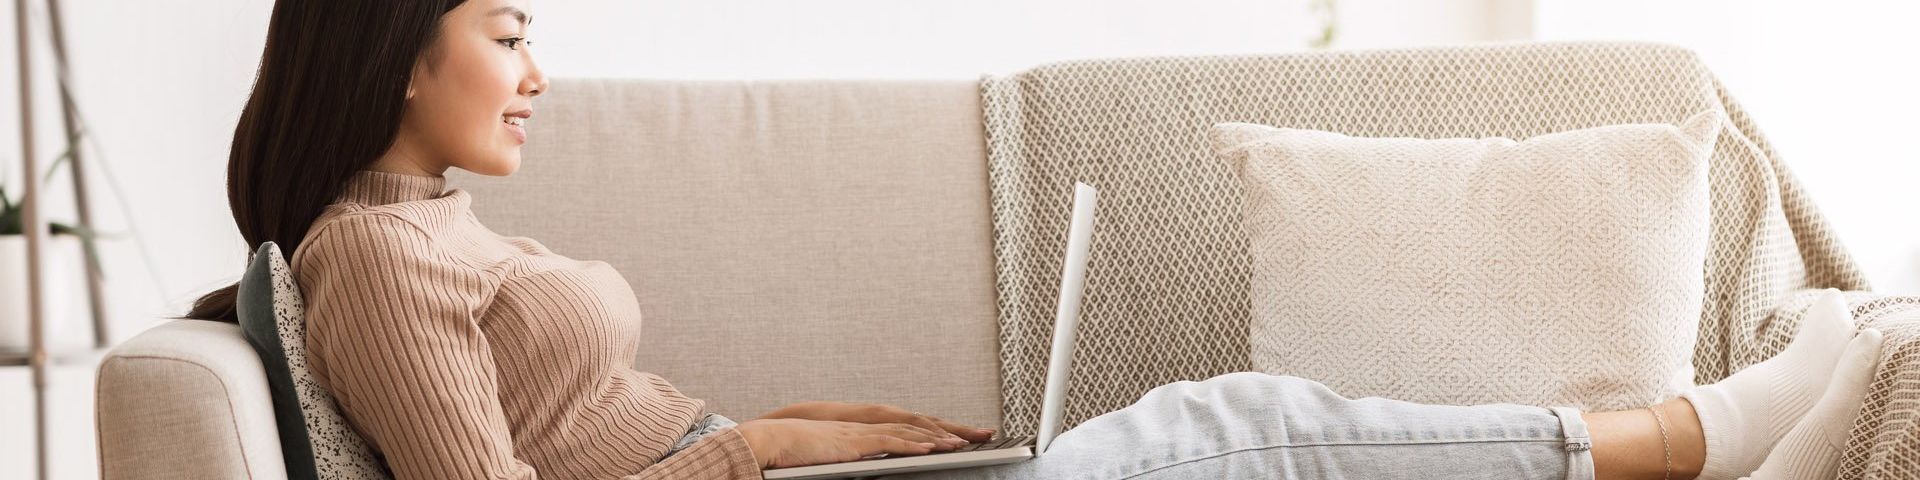 A woman in jeans and a sweater, lies on a beige couch, using a laptop.